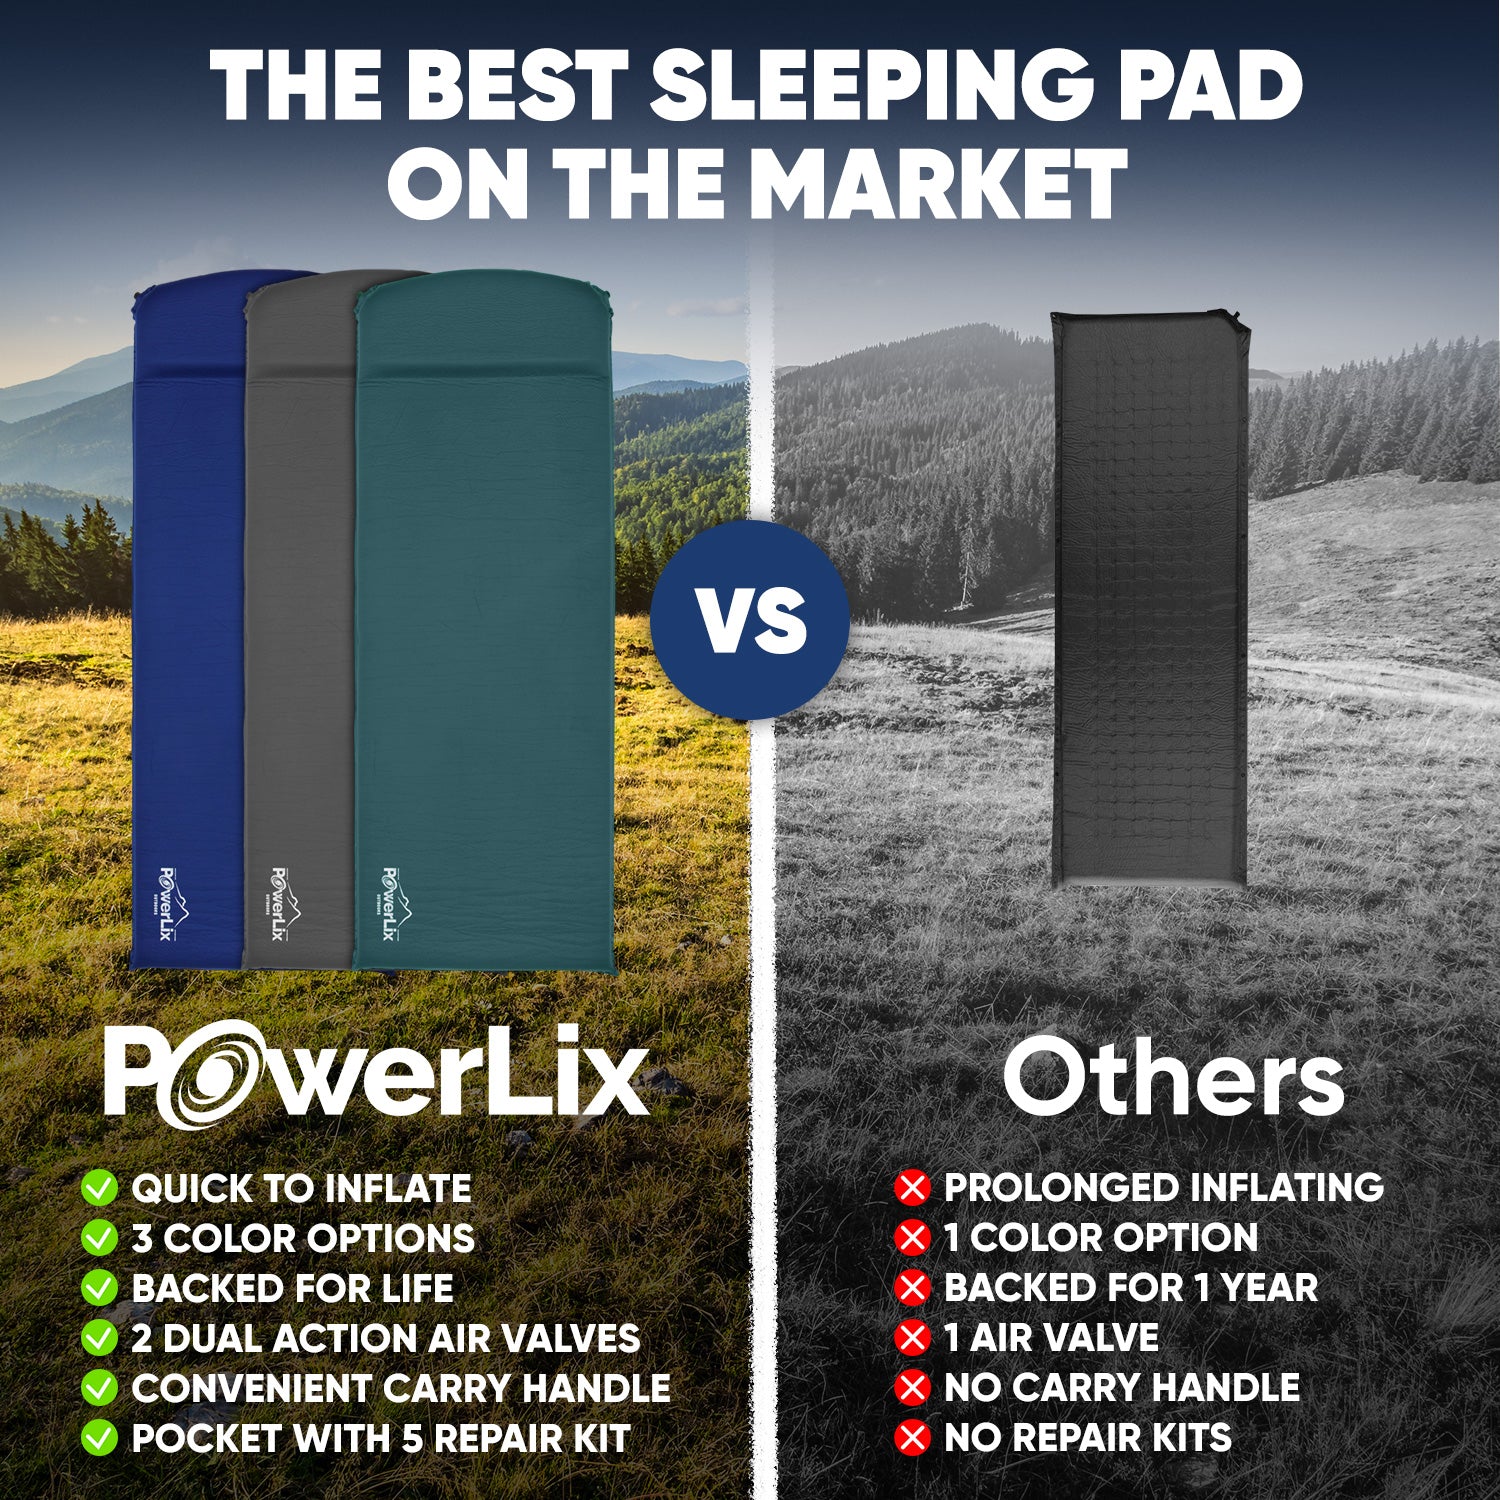 A comparison of three powerlix sleeping pads in the three available colors against an inferior sleeping pad. Text above reads, "The best sleeping pad on the market."